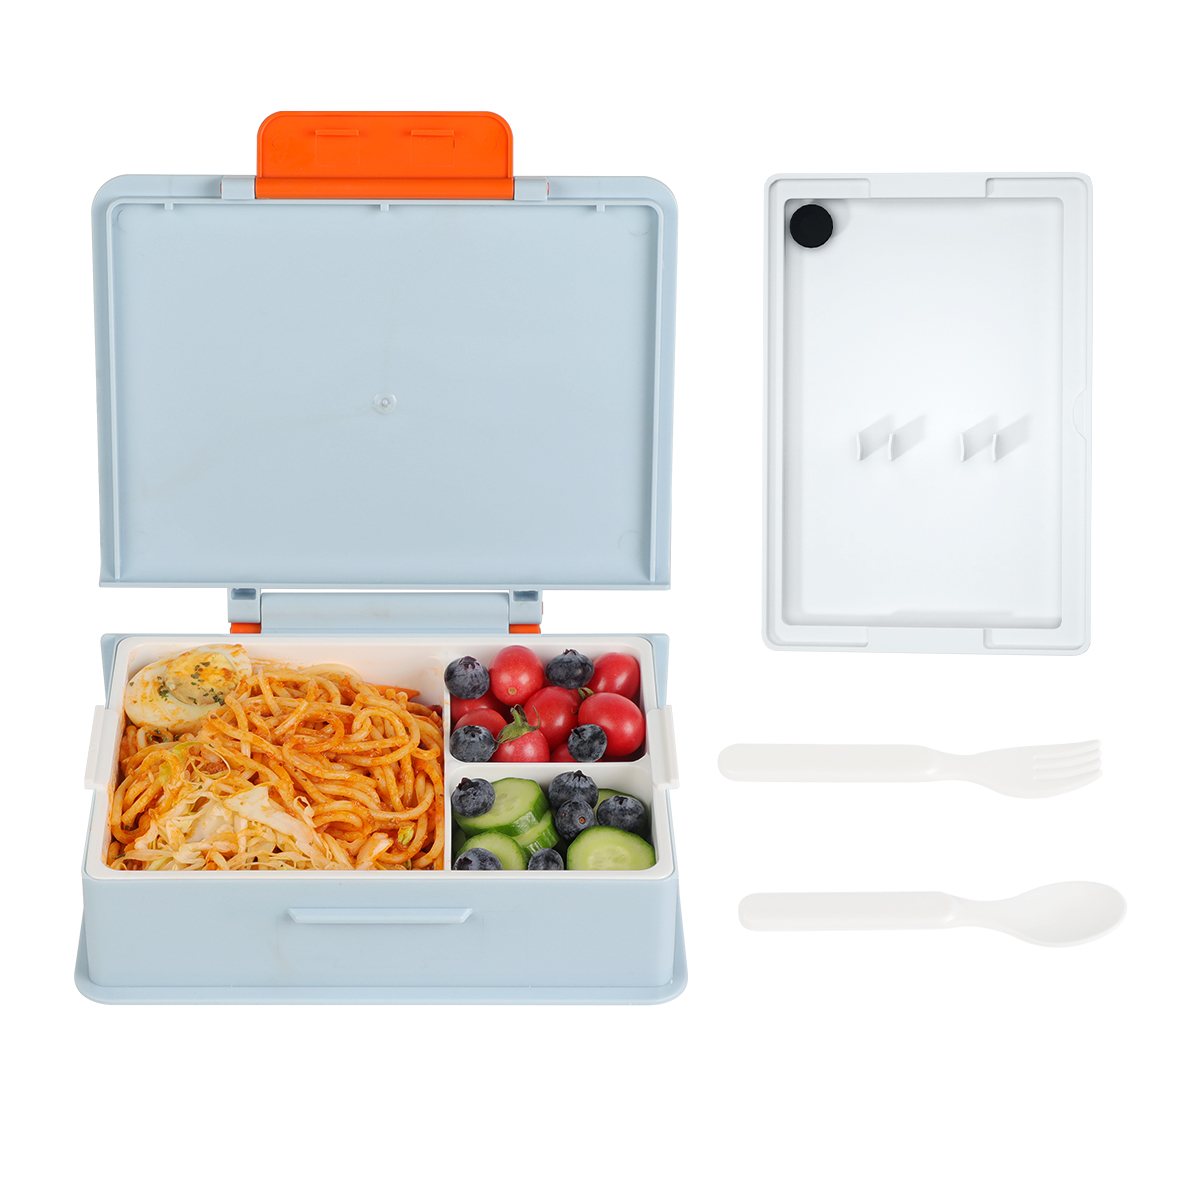 100% New Design 3 Compartment Lunch Box For Kids And Adults With Handle, Microwave Safe And BPA Free